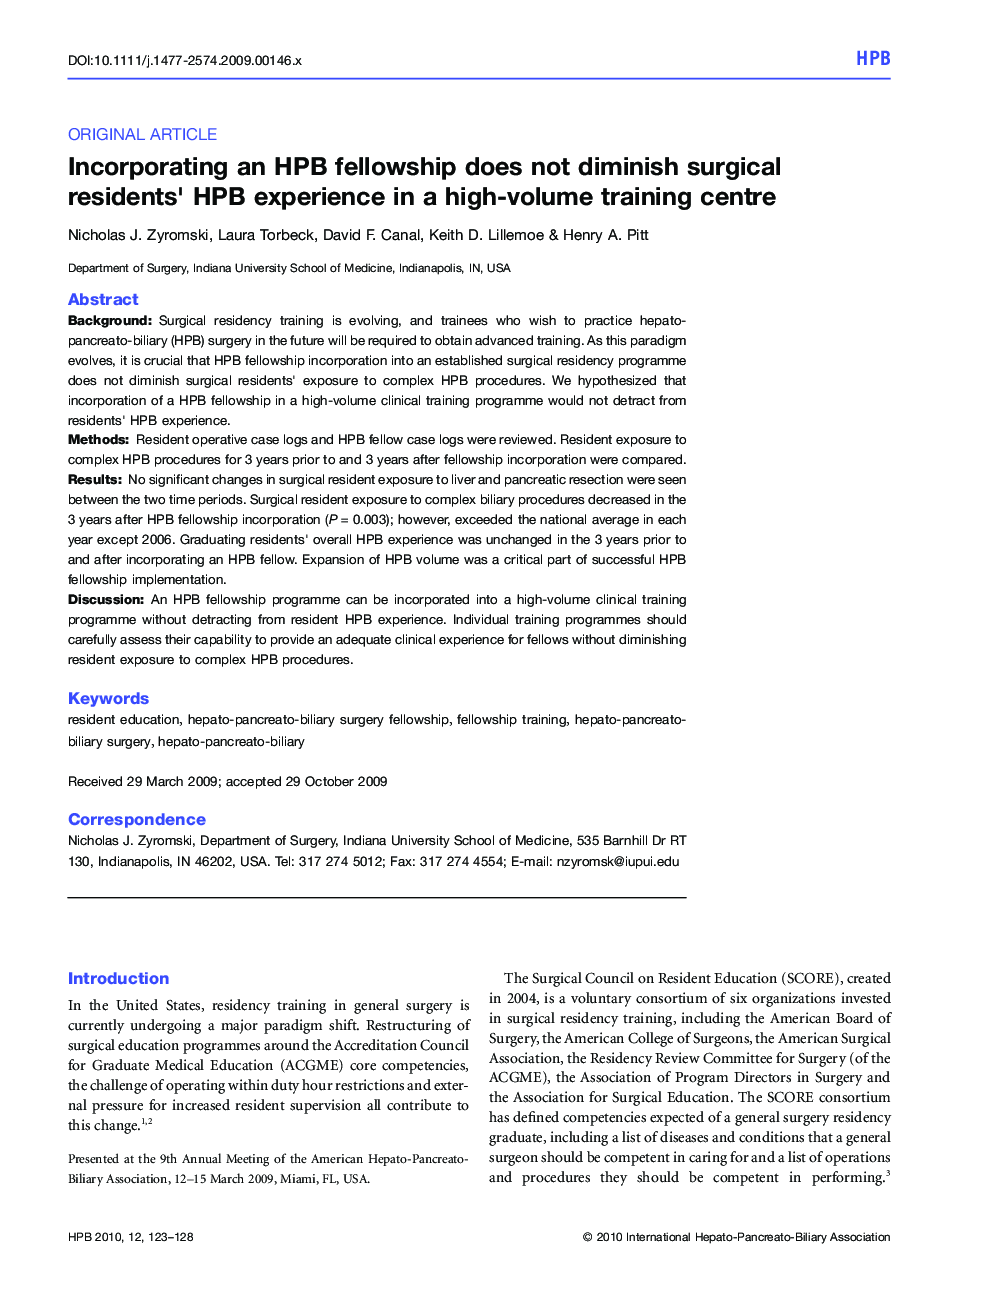 Incorporating an HPB fellowship does not diminish surgical residents' HPB experience in a high-volume training centre